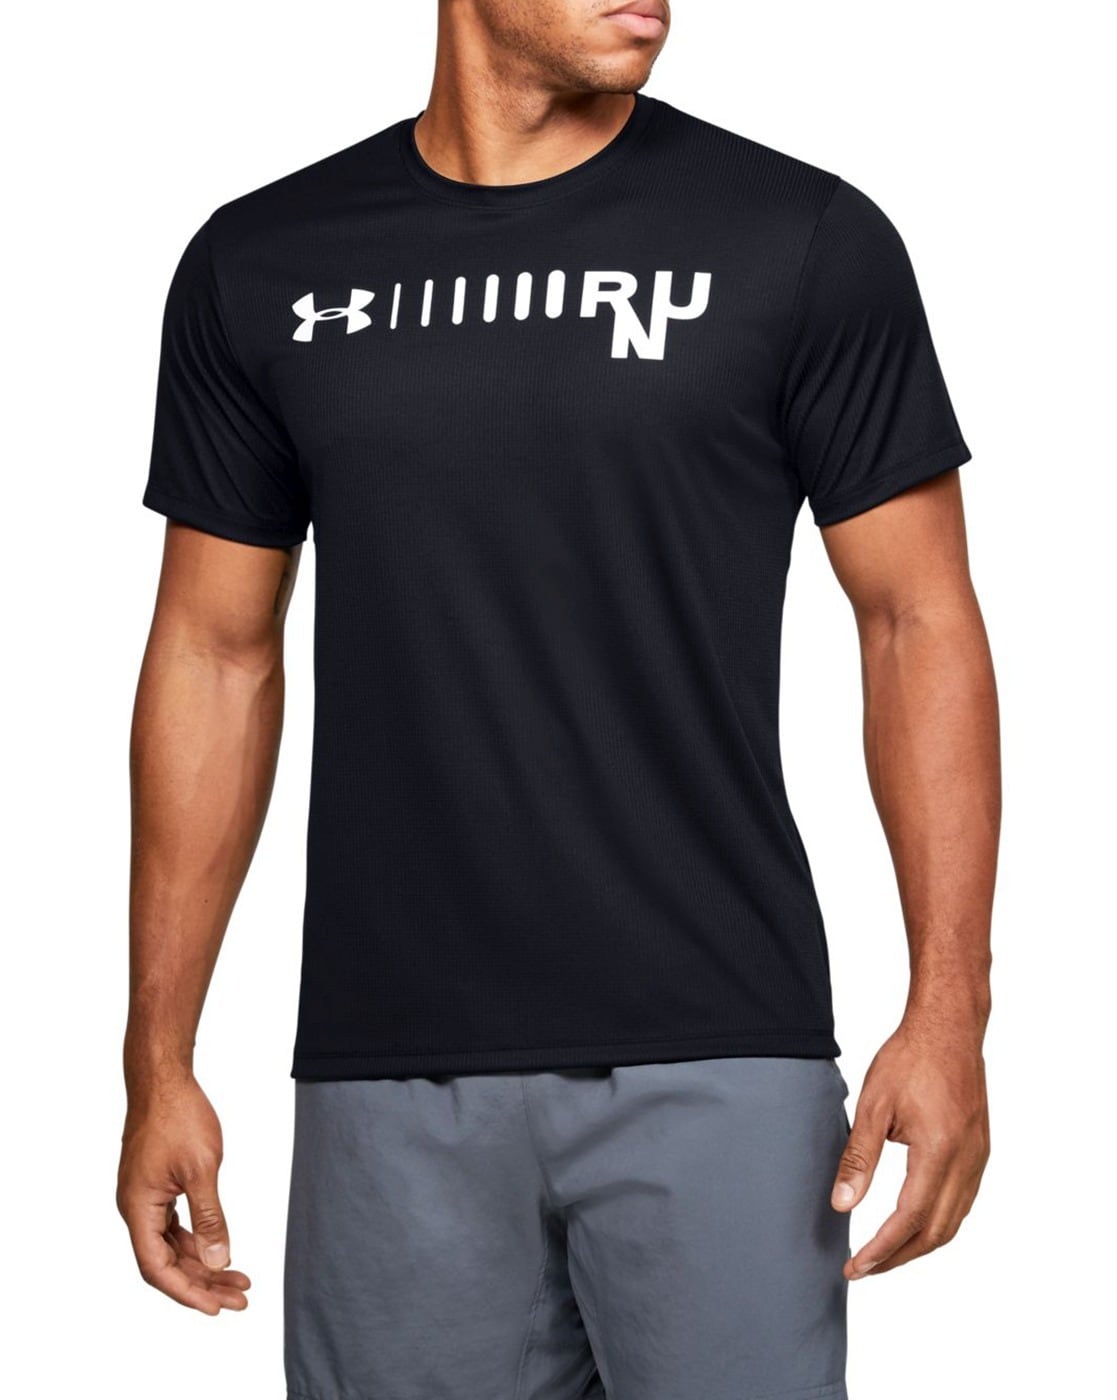 stride t shirts online india